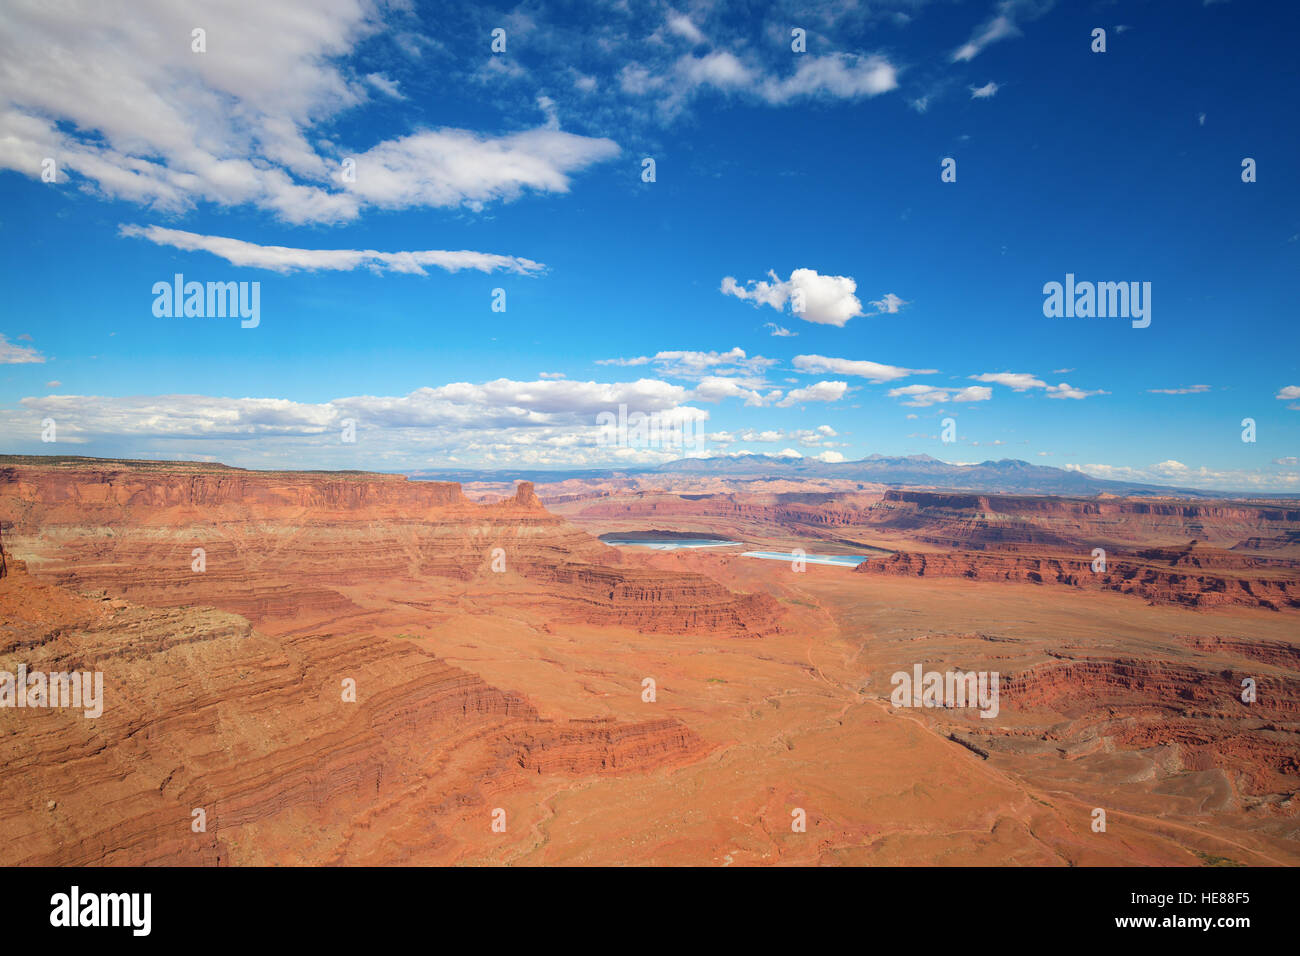 "Dead horse" state park near the Canyonlands Narional Park in Utah, USA Stock Photo